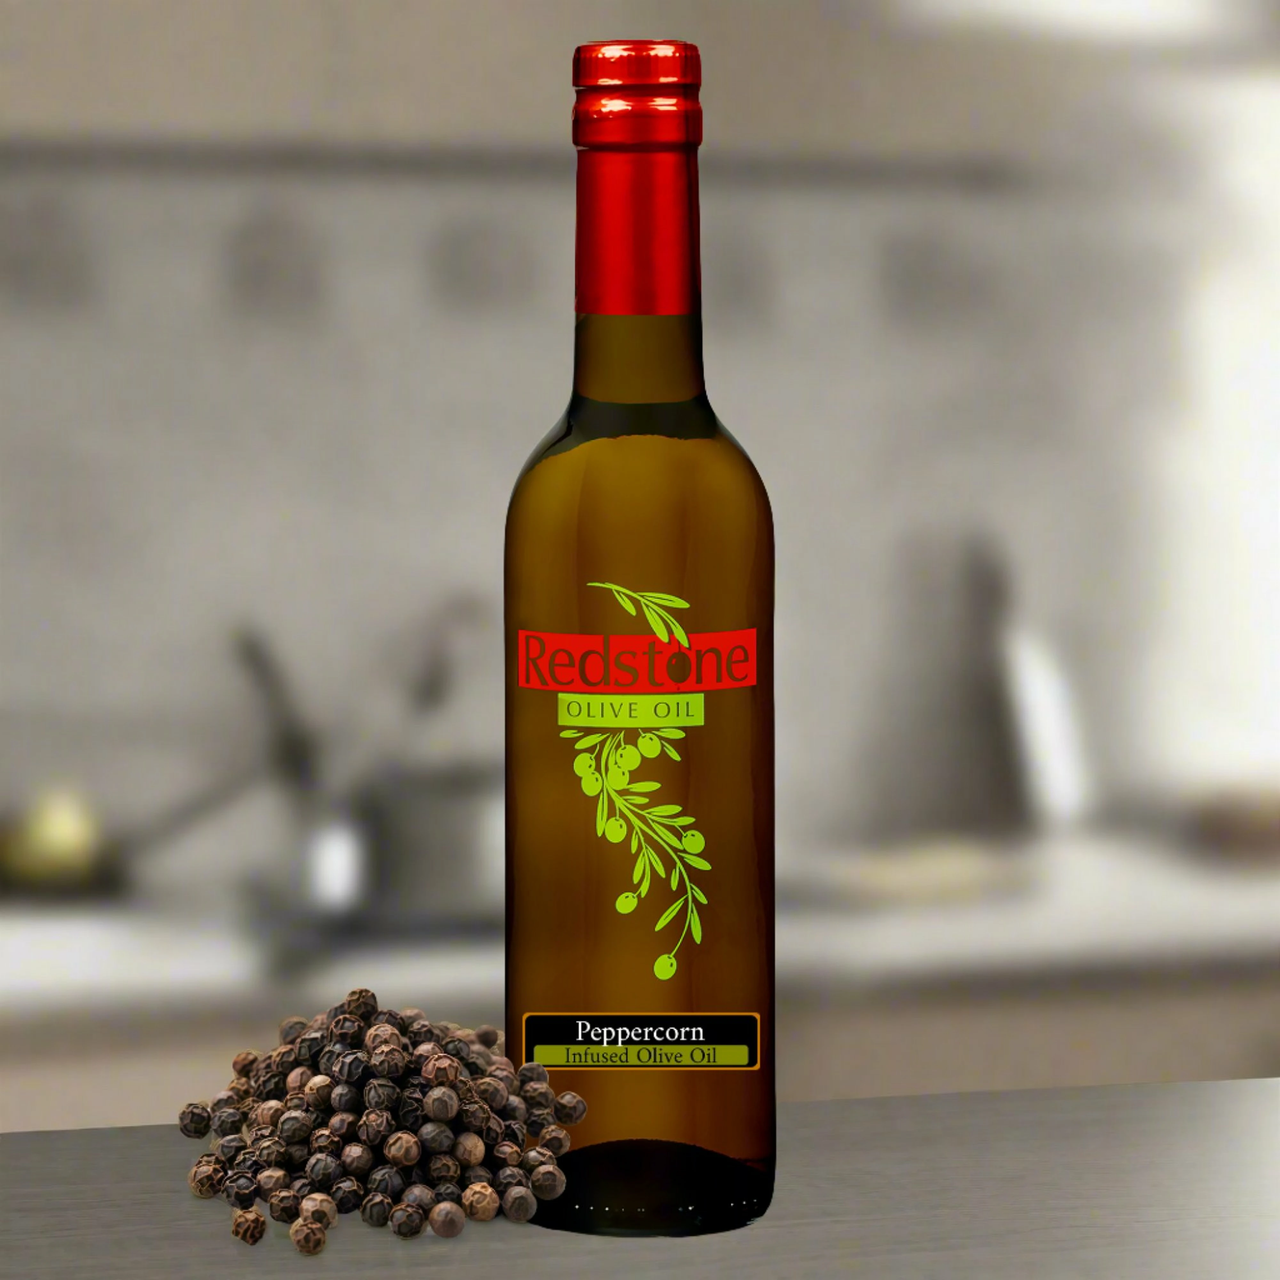 Elegant presentation of Black Peppercorn Infused Olive Oil with scattered peppercorns around the bottle